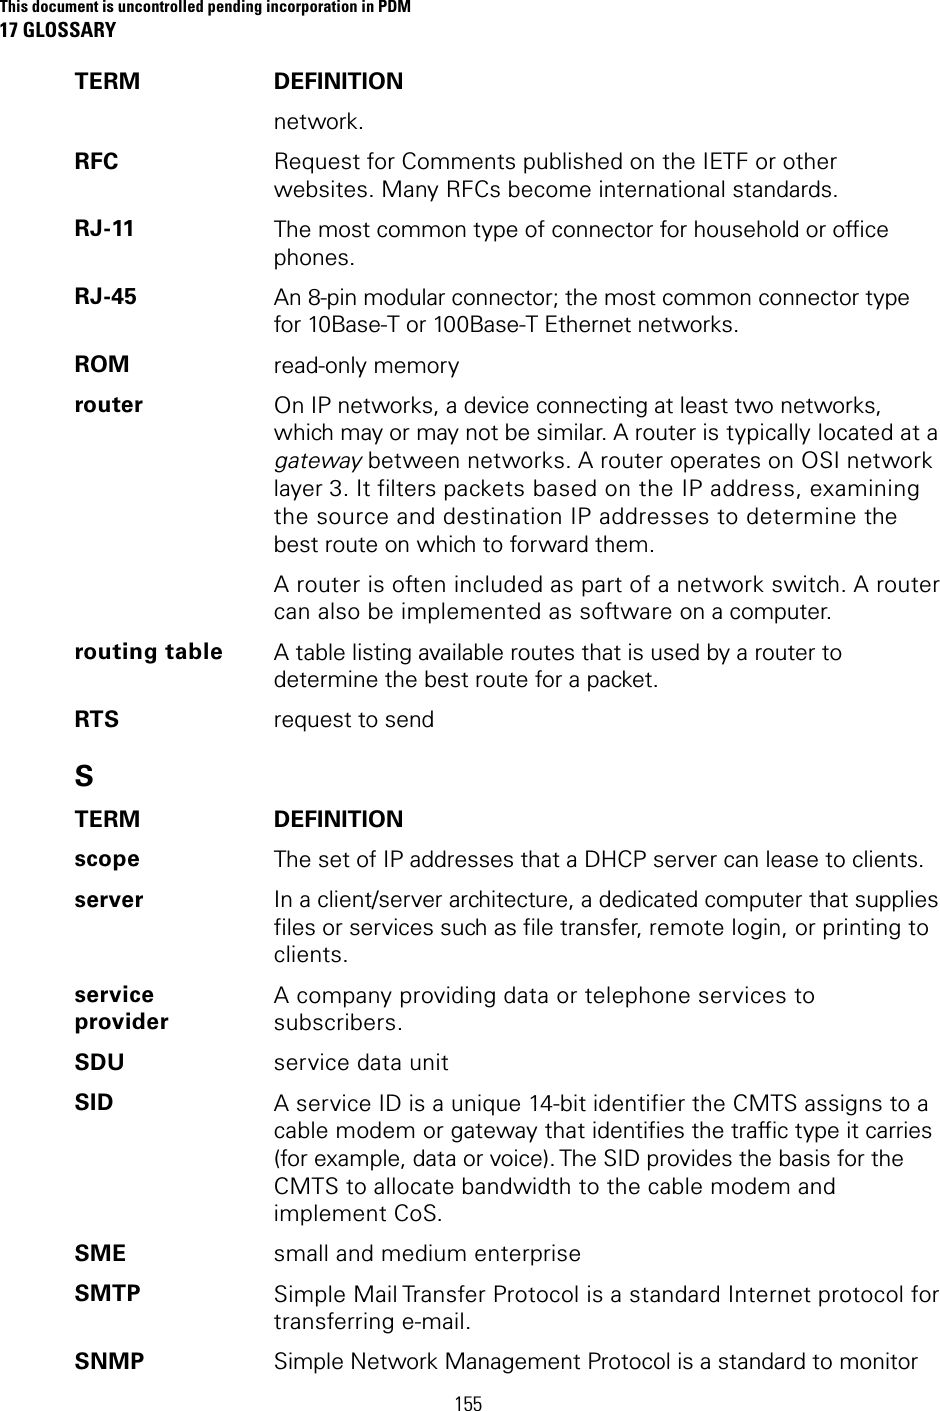 This document is uncontrolled pending incorporation in PDM 17 GLOSSARY  155 TERM DEFINITION network. RFC  Request for Comments published on the IETF or other websites. Many RFCs become international standards. RJ-11  The most common type of connector for household or office phones. RJ-45  An 8-pin modular connector; the most common connector type for 10Base-T or 100Base-T Ethernet networks. ROM  read-only memory router  On IP networks, a device connecting at least two networks, which may or may not be similar. A router is typically located at a gateway between networks. A router operates on OSI network layer 3. It filters packets based on the IP address, examining the source and destination IP addresses to determine the best route on which to forward them. A router is often included as part of a network switch. A router can also be implemented as software on a computer. routing table  A table listing available routes that is used by a router to determine the best route for a packet. RTS  request to send S TERM DEFINITION scope  The set of IP addresses that a DHCP server can lease to clients. server  In a client/server architecture, a dedicated computer that supplies files or services such as file transfer, remote login, or printing to clients. service provider A company providing data or telephone services to subscribers. SDU  service data unit SID  A service ID is a unique 14-bit identifier the CMTS assigns to a cable modem or gateway that identifies the traffic type it carries (for example, data or voice). The SID provides the basis for the CMTS to allocate bandwidth to the cable modem and implement CoS. SME  small and medium enterprise SMTP  Simple Mail Transfer Protocol is a standard Internet protocol for transferring e-mail. SNMP  Simple Network Management Protocol is a standard to monitor 